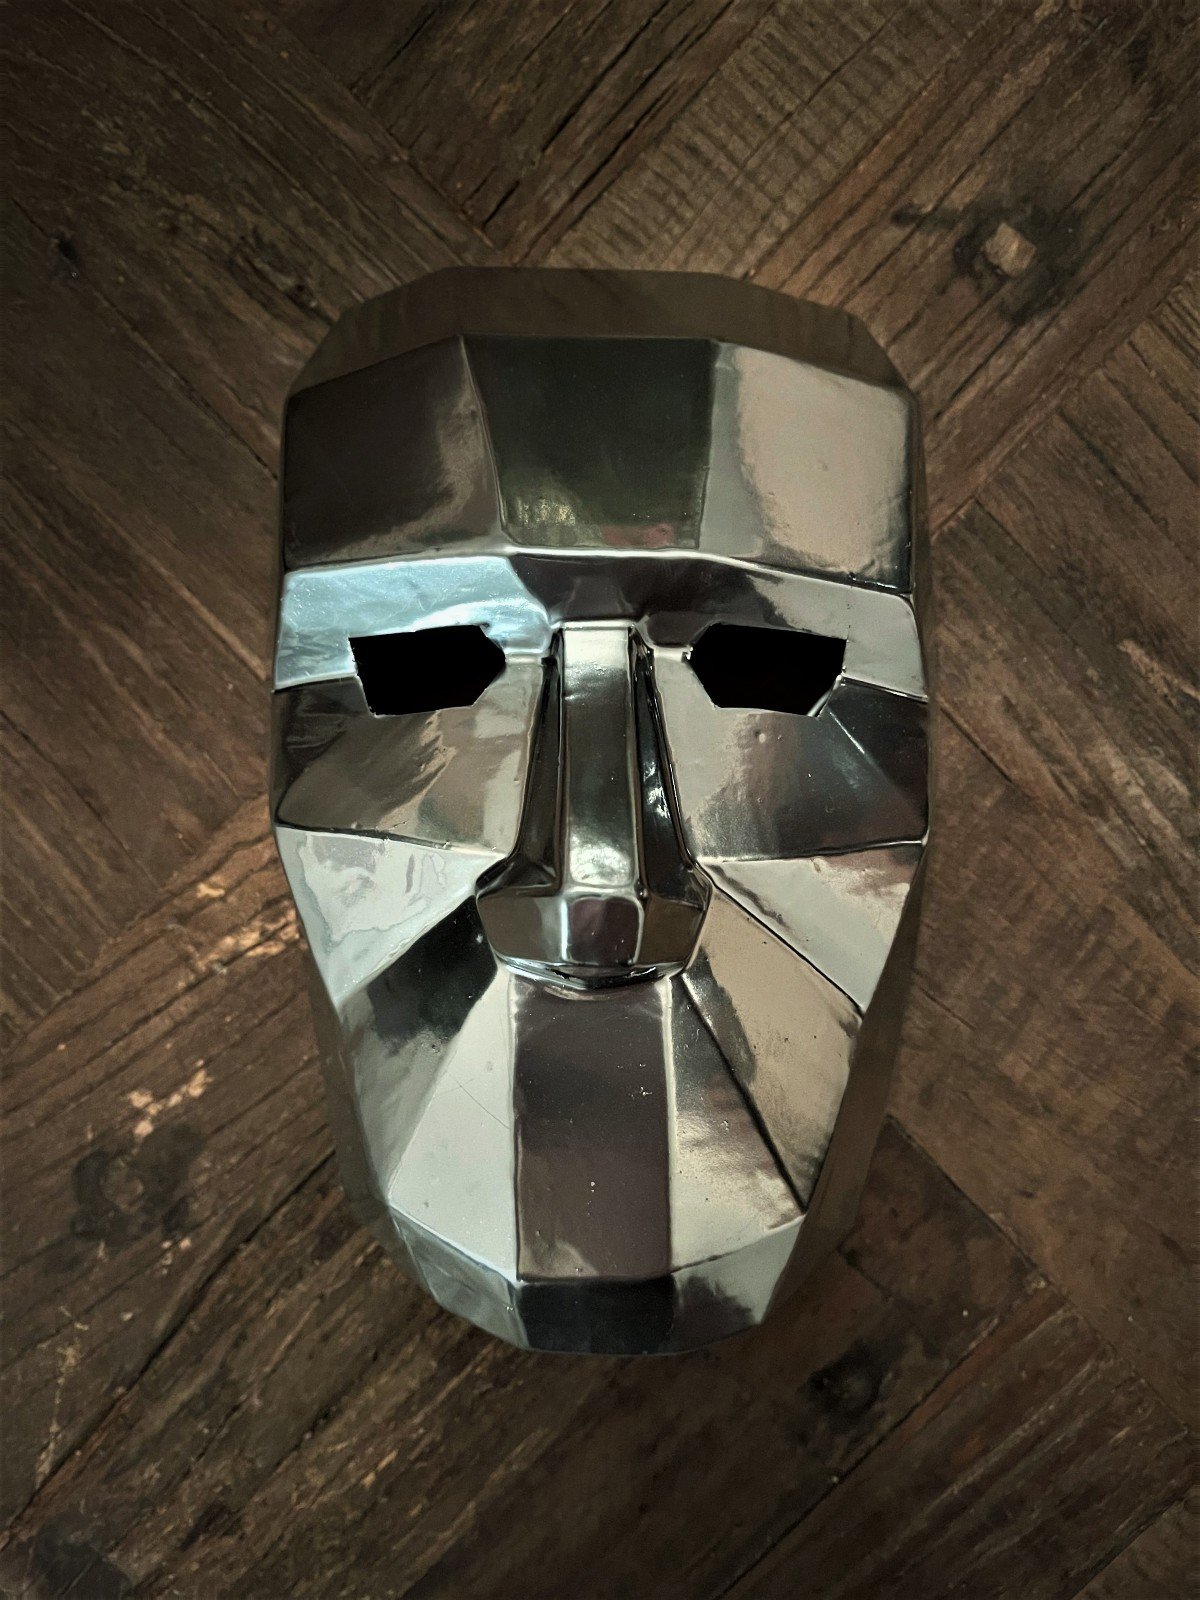 replica of the mask from the movie